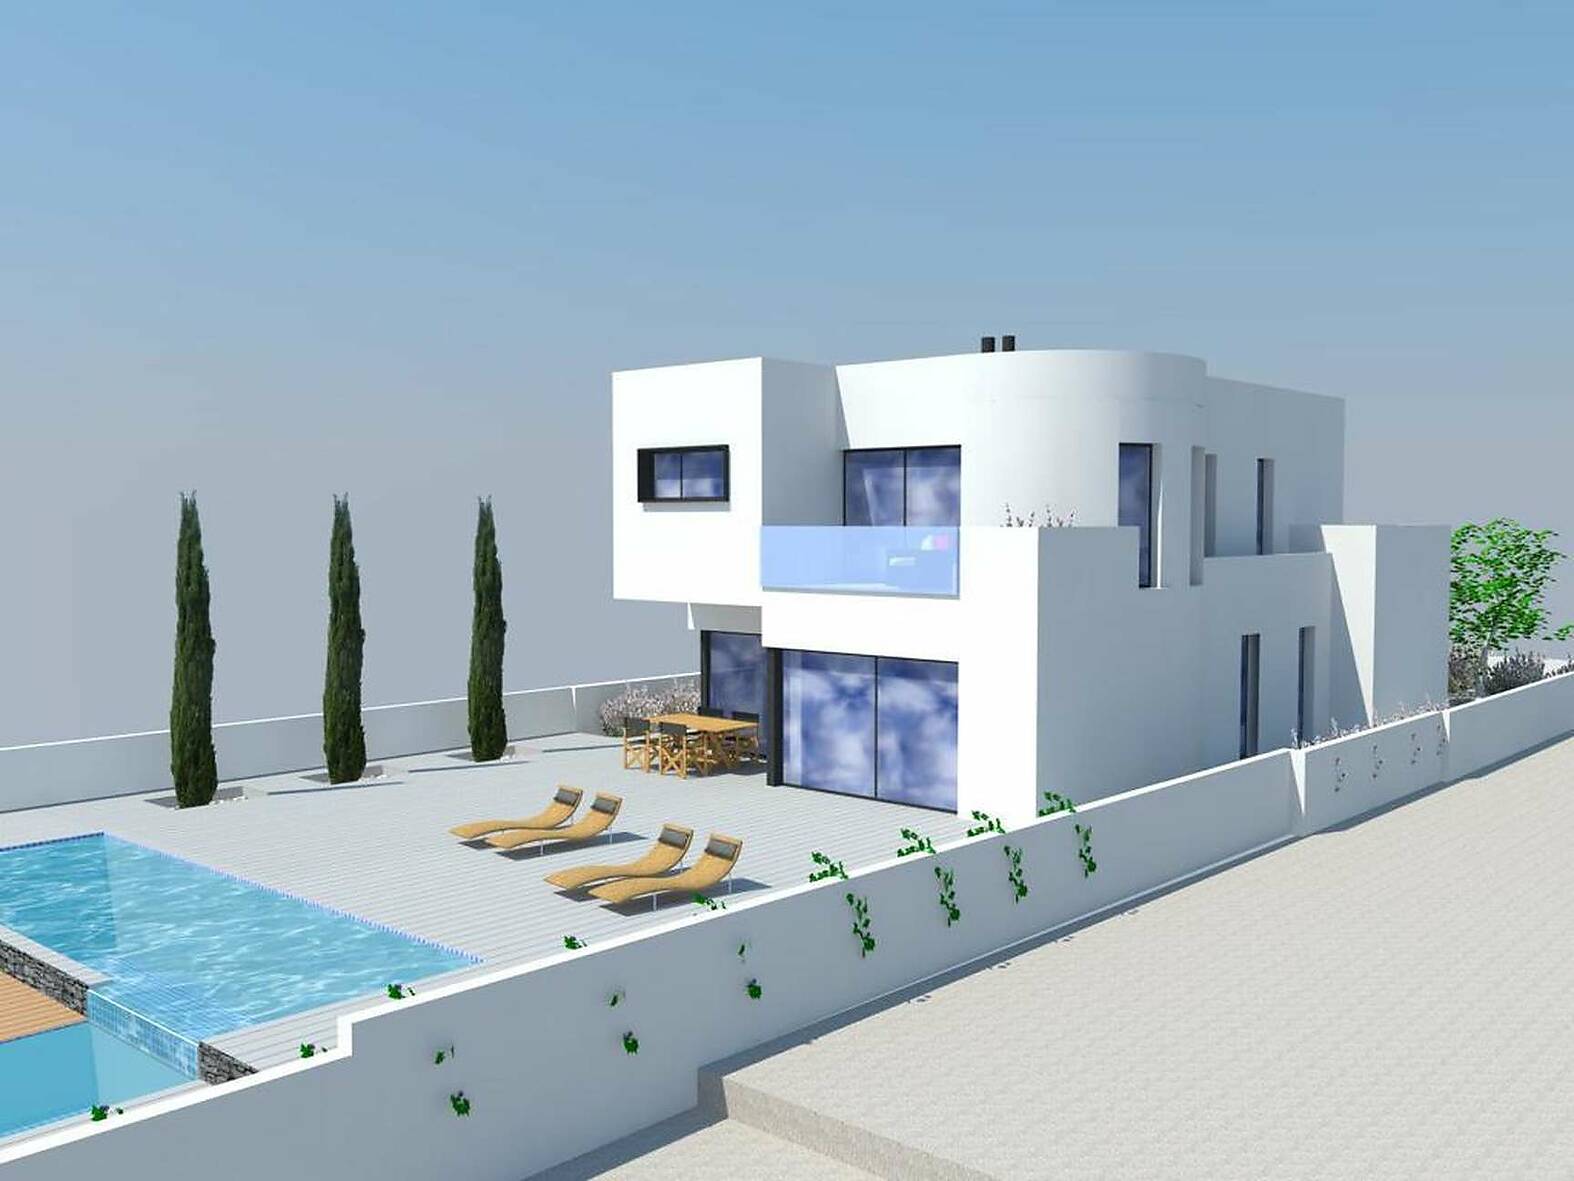 Project! Spectacular villa located in one of the most exclusive areas of Empuriabrava